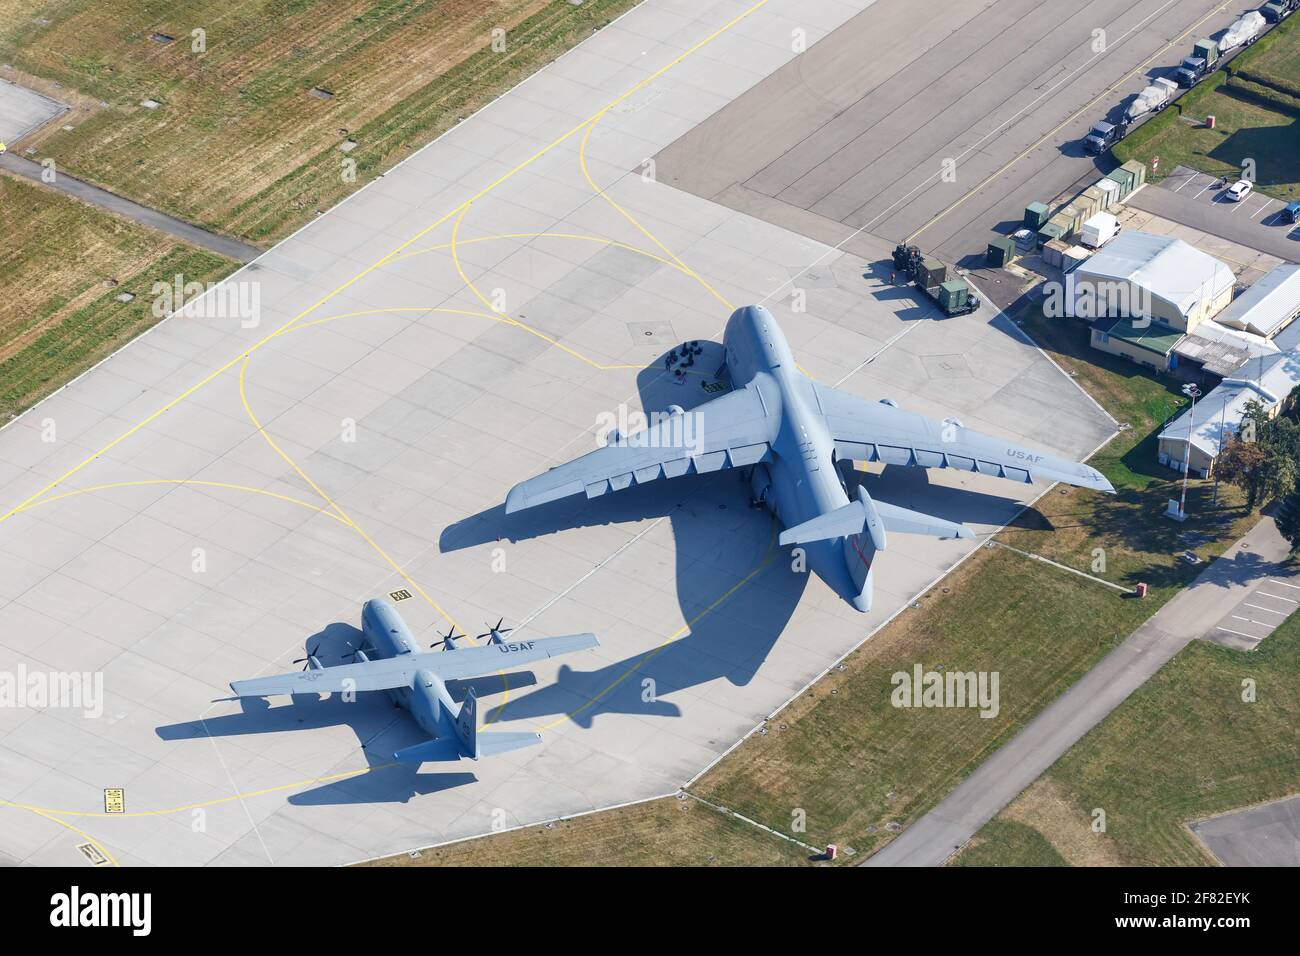 Stuttgart, Germany – September 2, 2016: Aerial photo of USA Air Force Lockheed Super Galaxy military aircraft at Stuttgart airport (STR) in Germany. Stock Photo